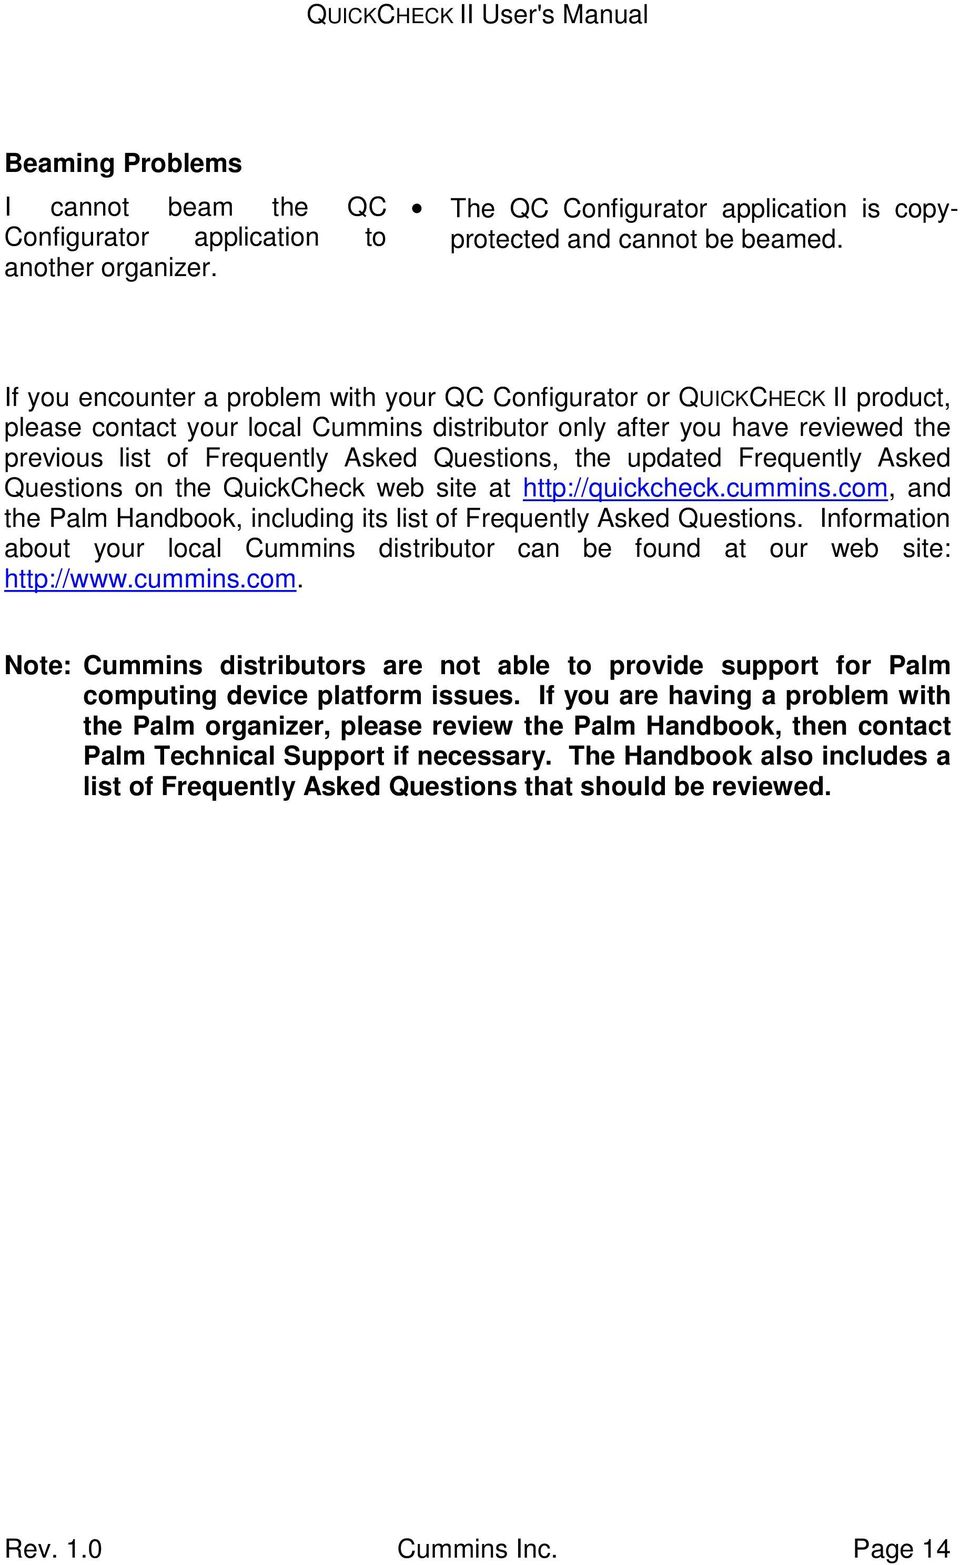 Questions, the updated Frequently Asked Questions on the QuickCheck web site at http://quickcheck.cummins.com, and the Palm Handbook, including its list of Frequently Asked Questions.